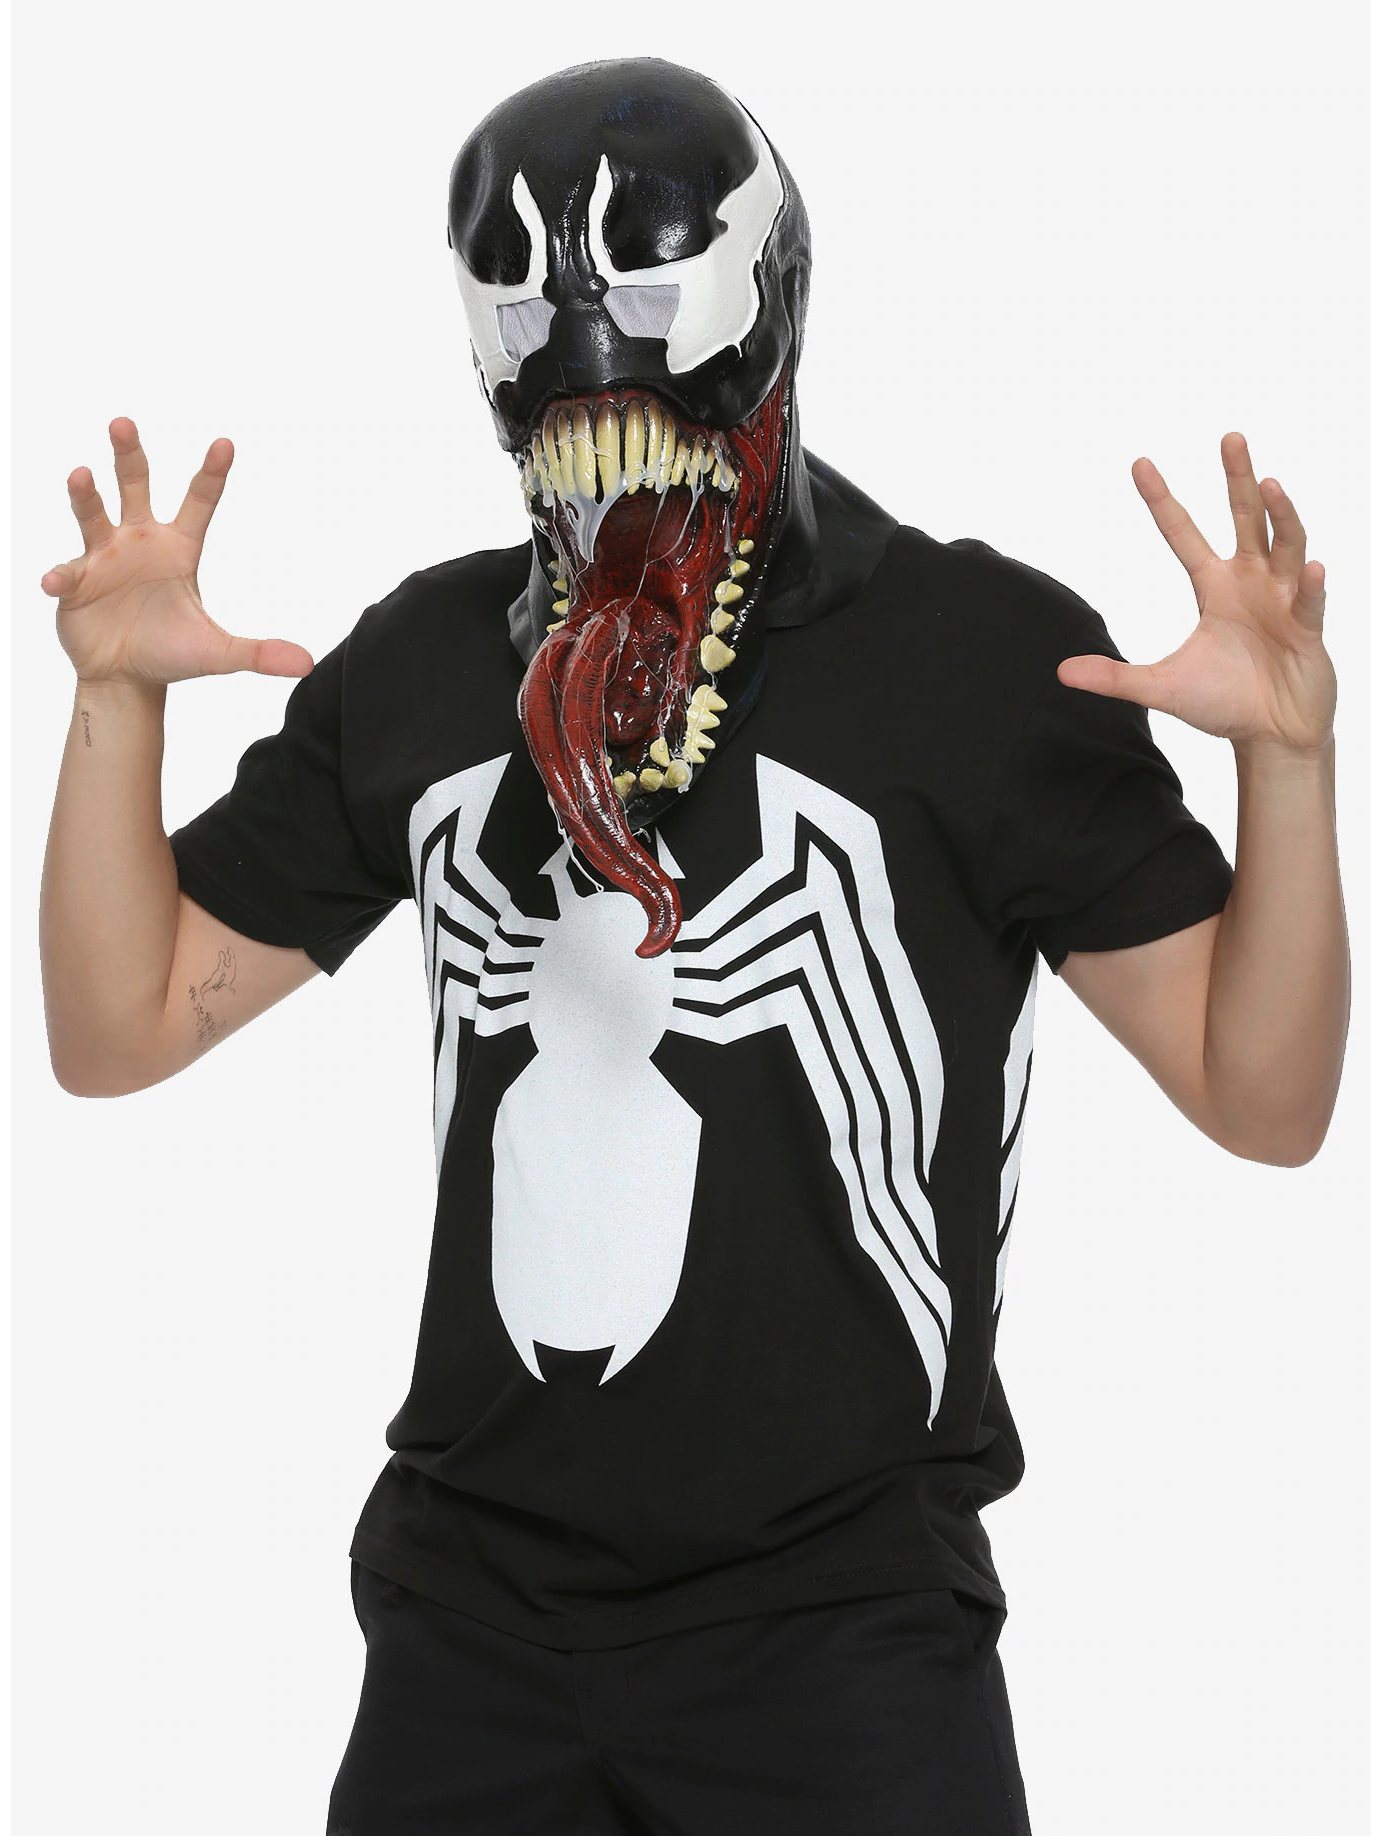 Grim Reaper Skull Latex Mask, White/Black, One Size, Wearable Costume  Accessory for Halloween